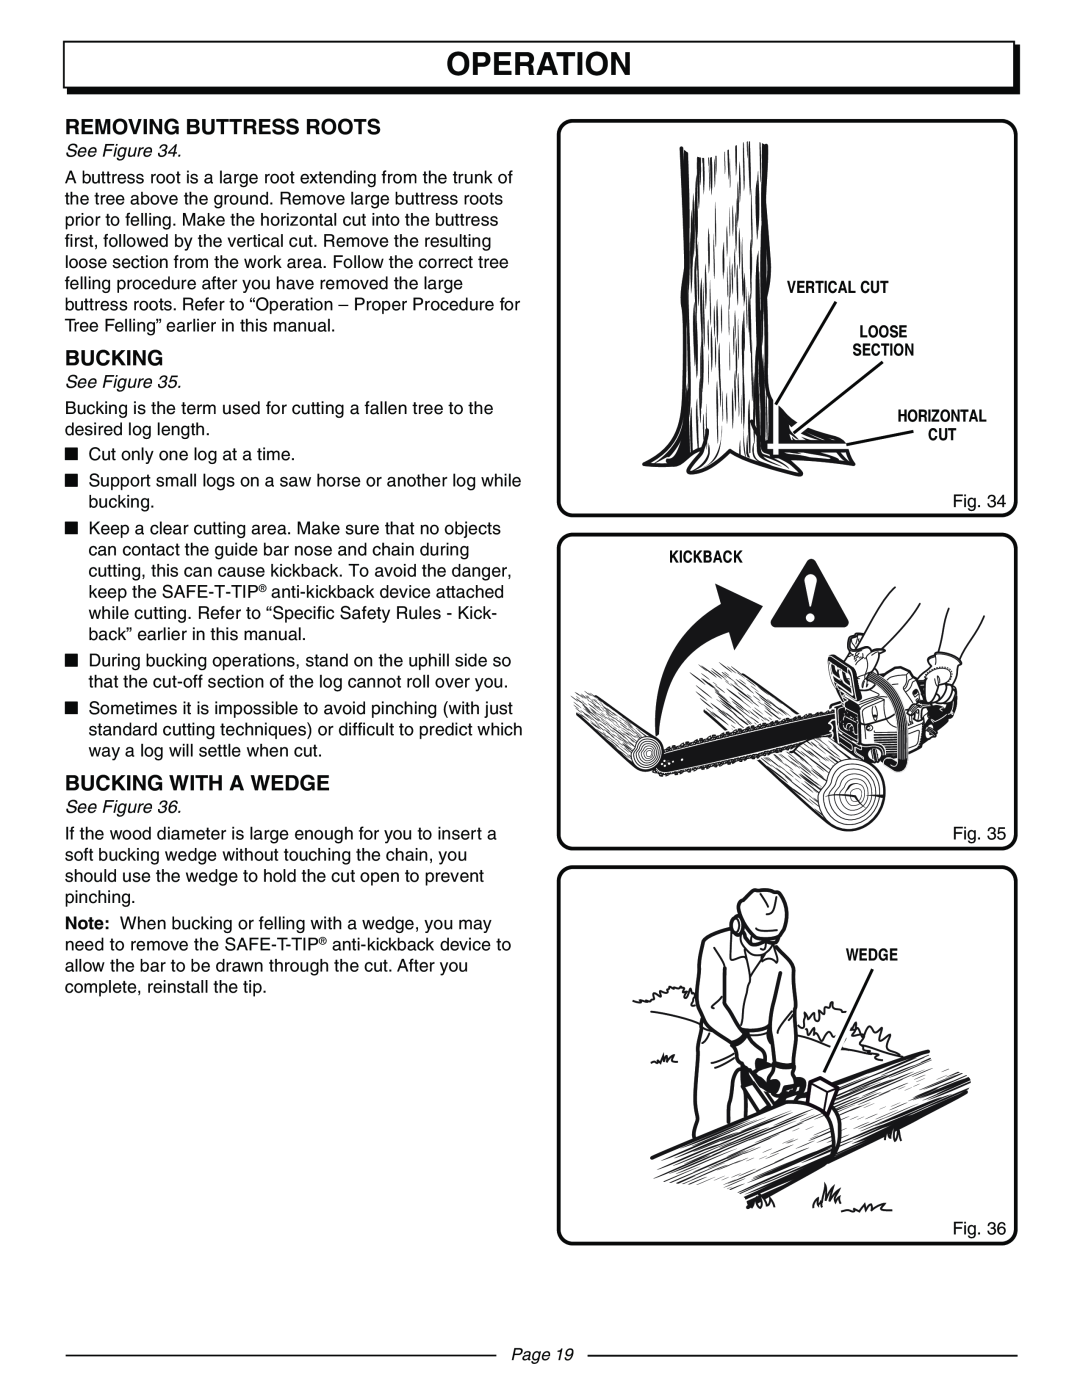 Homelite UT10942D manual Removing Buttress Roots, Bucking With A Wedge, Operation, See Figure, Page 